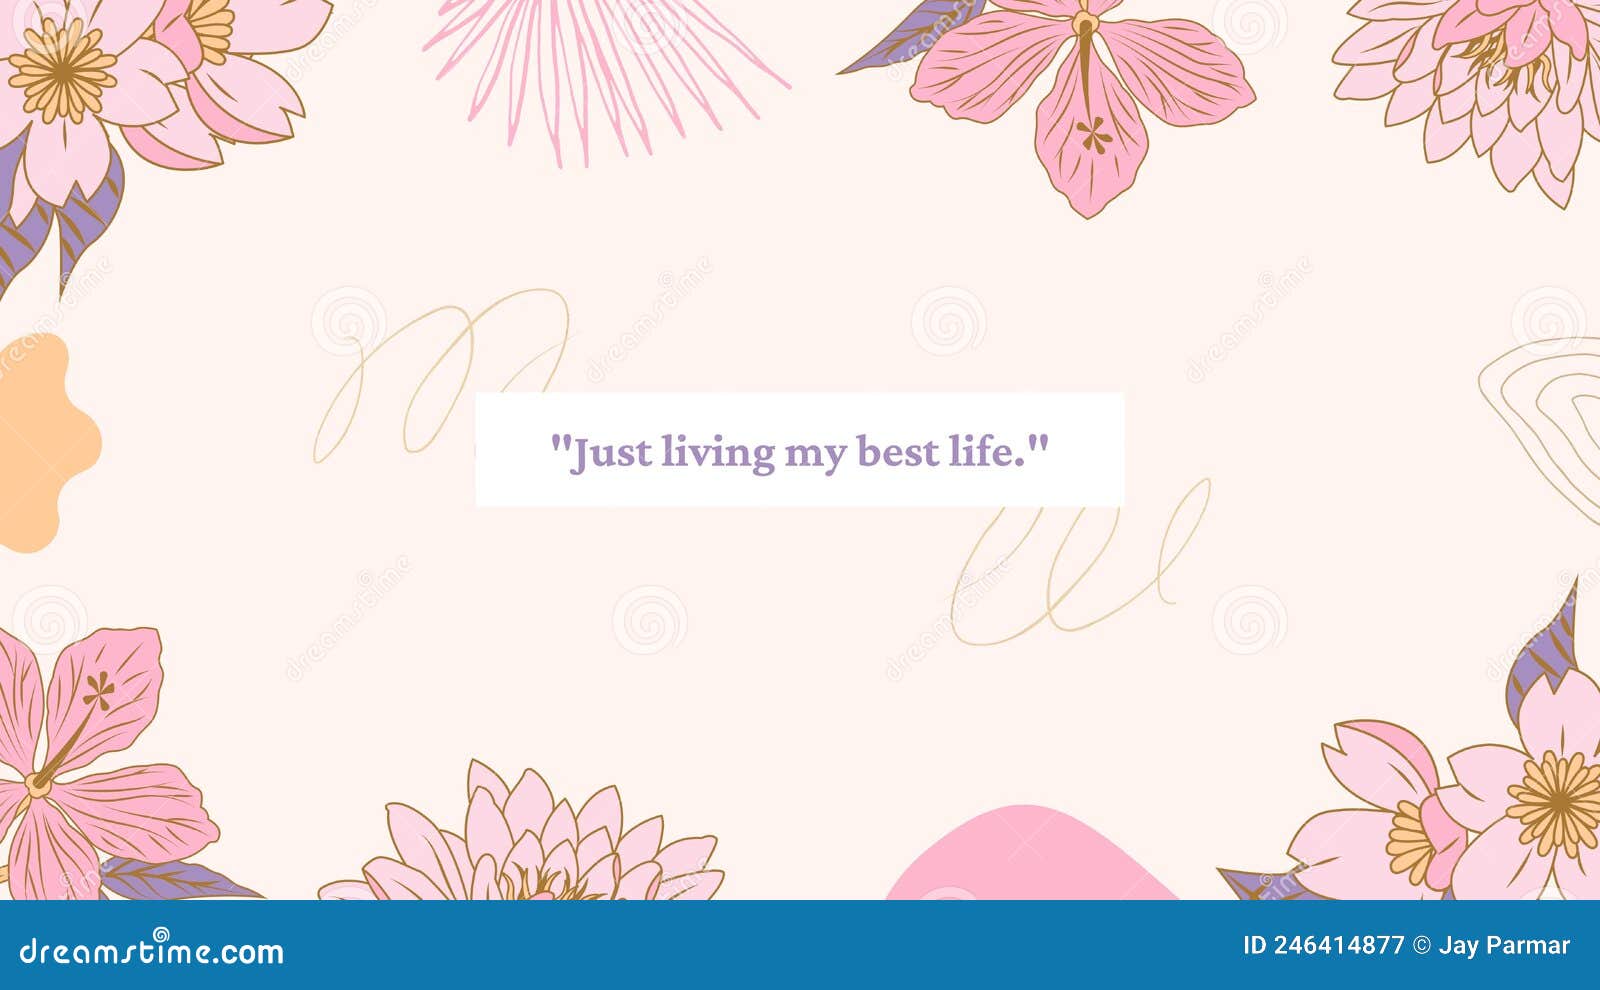 colorful quote desktop backgrounds